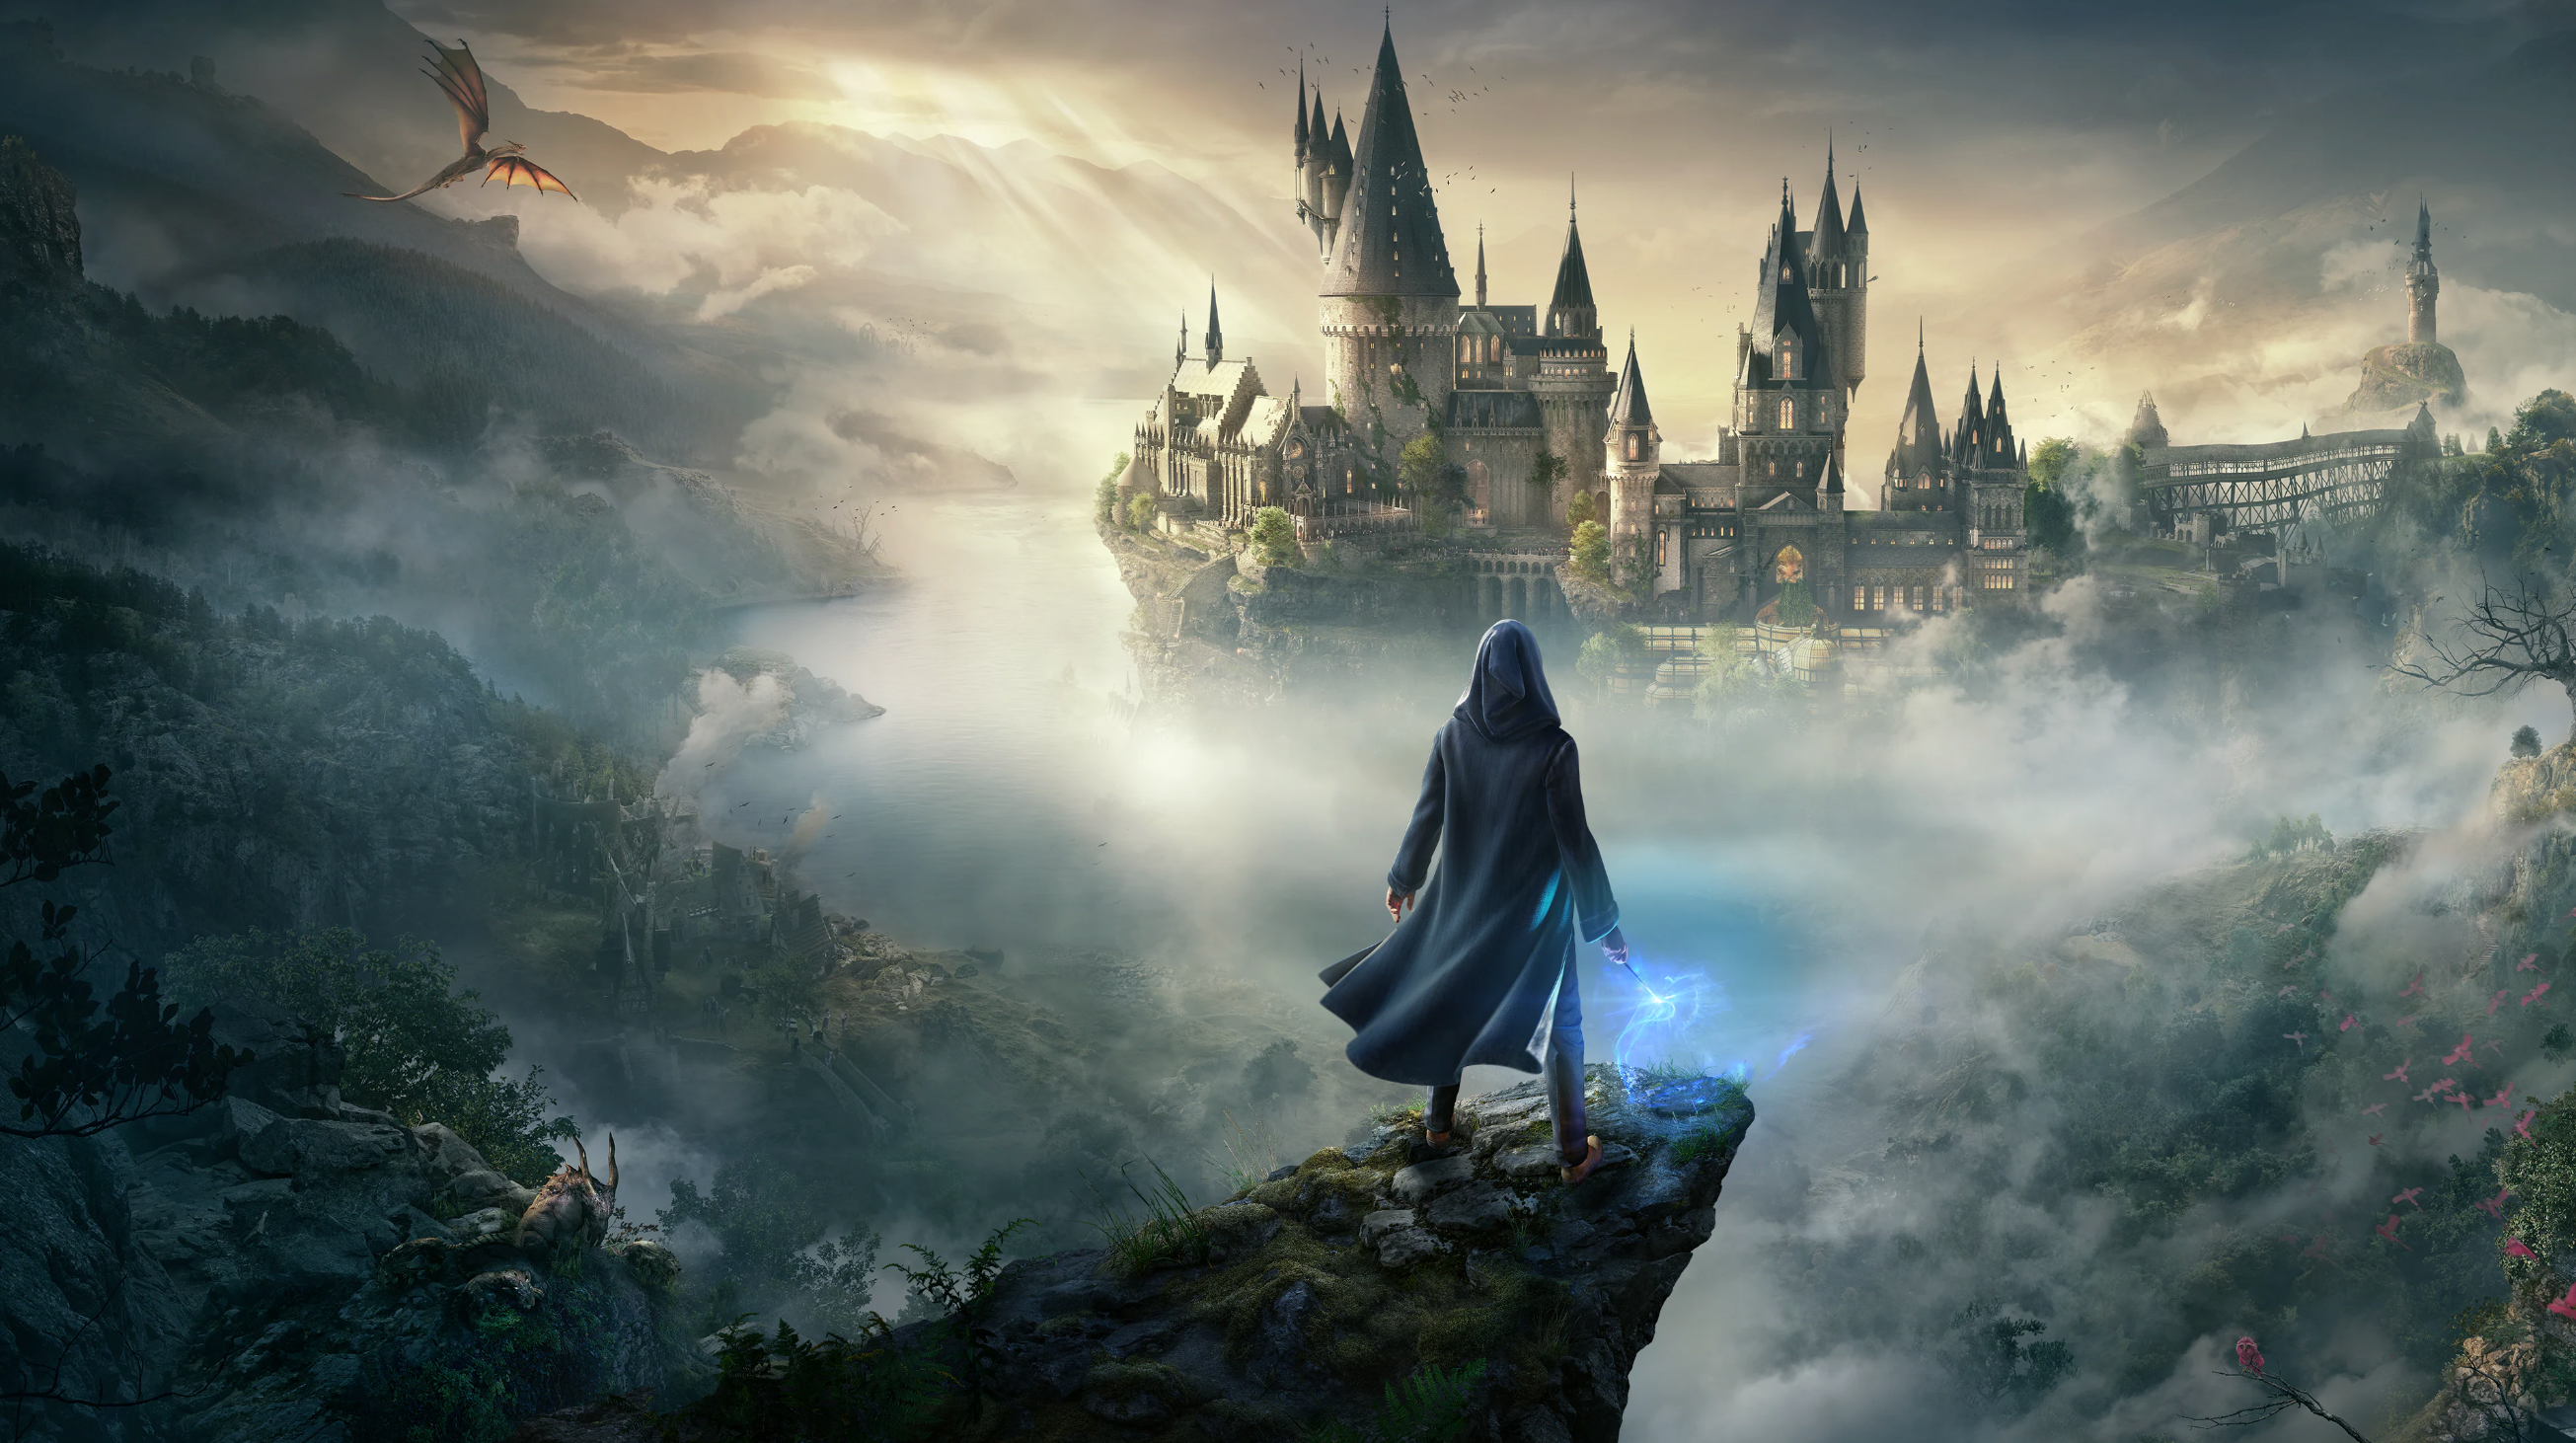 Hogwarts Legacy: 10 Things We Know About The Upcoming Harry Potter